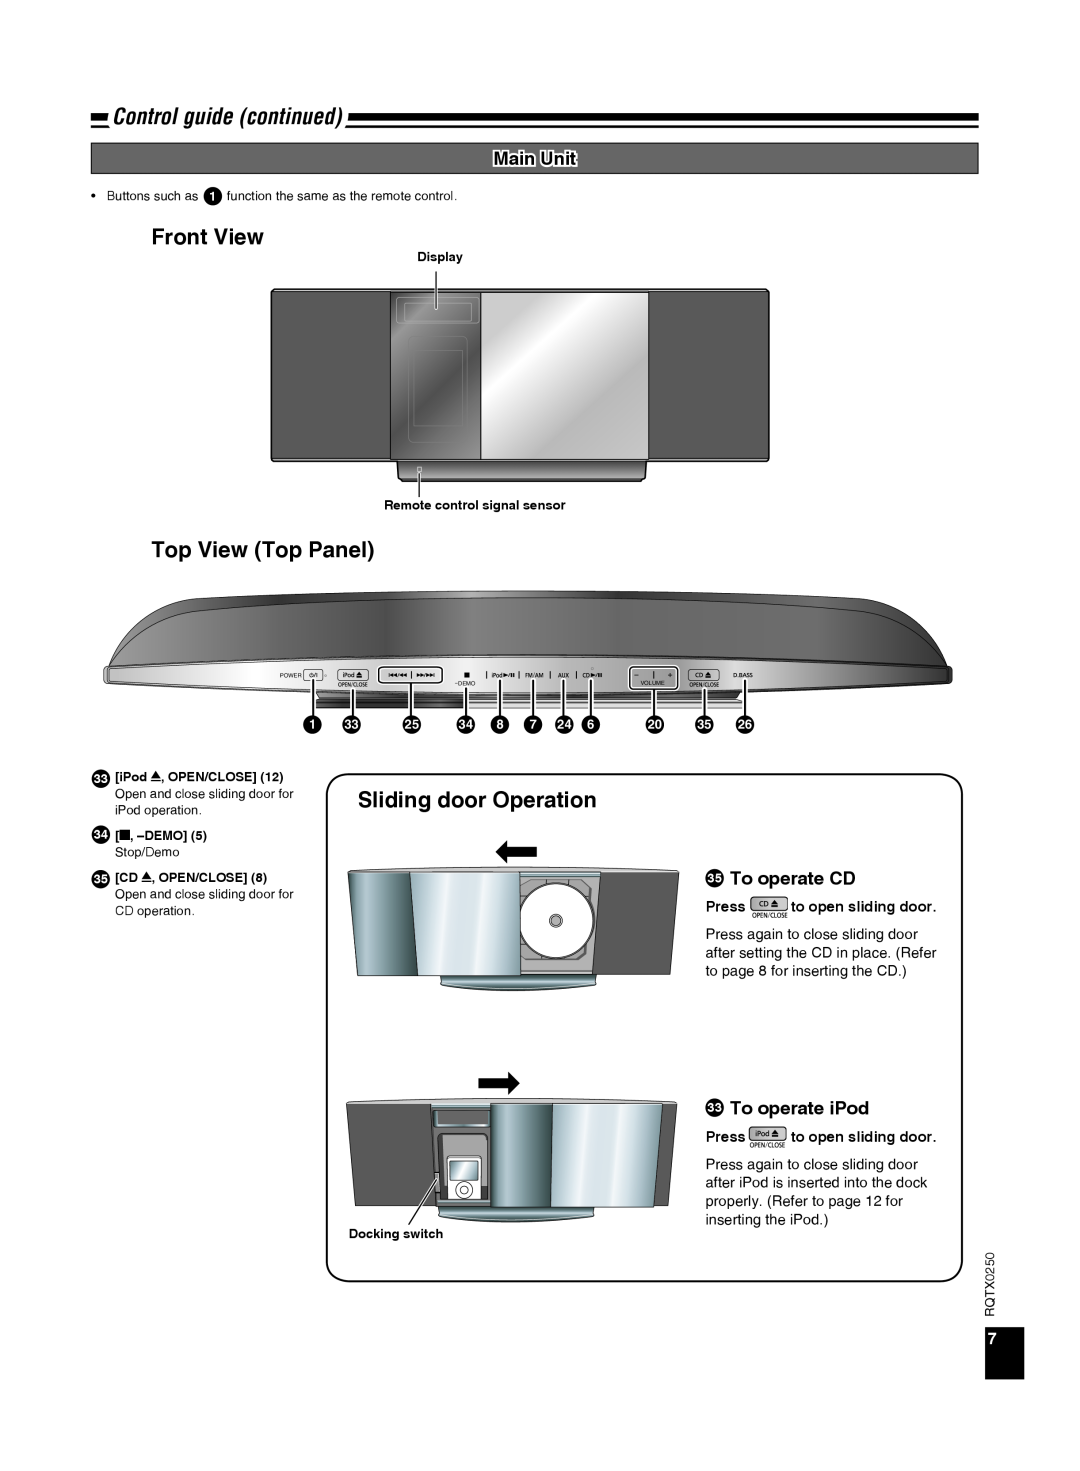 Panasonic SC-HC3 Control guide continued, Front View, Top View Top Panel, Sliding door Operation, Main Unit, To operate CD 